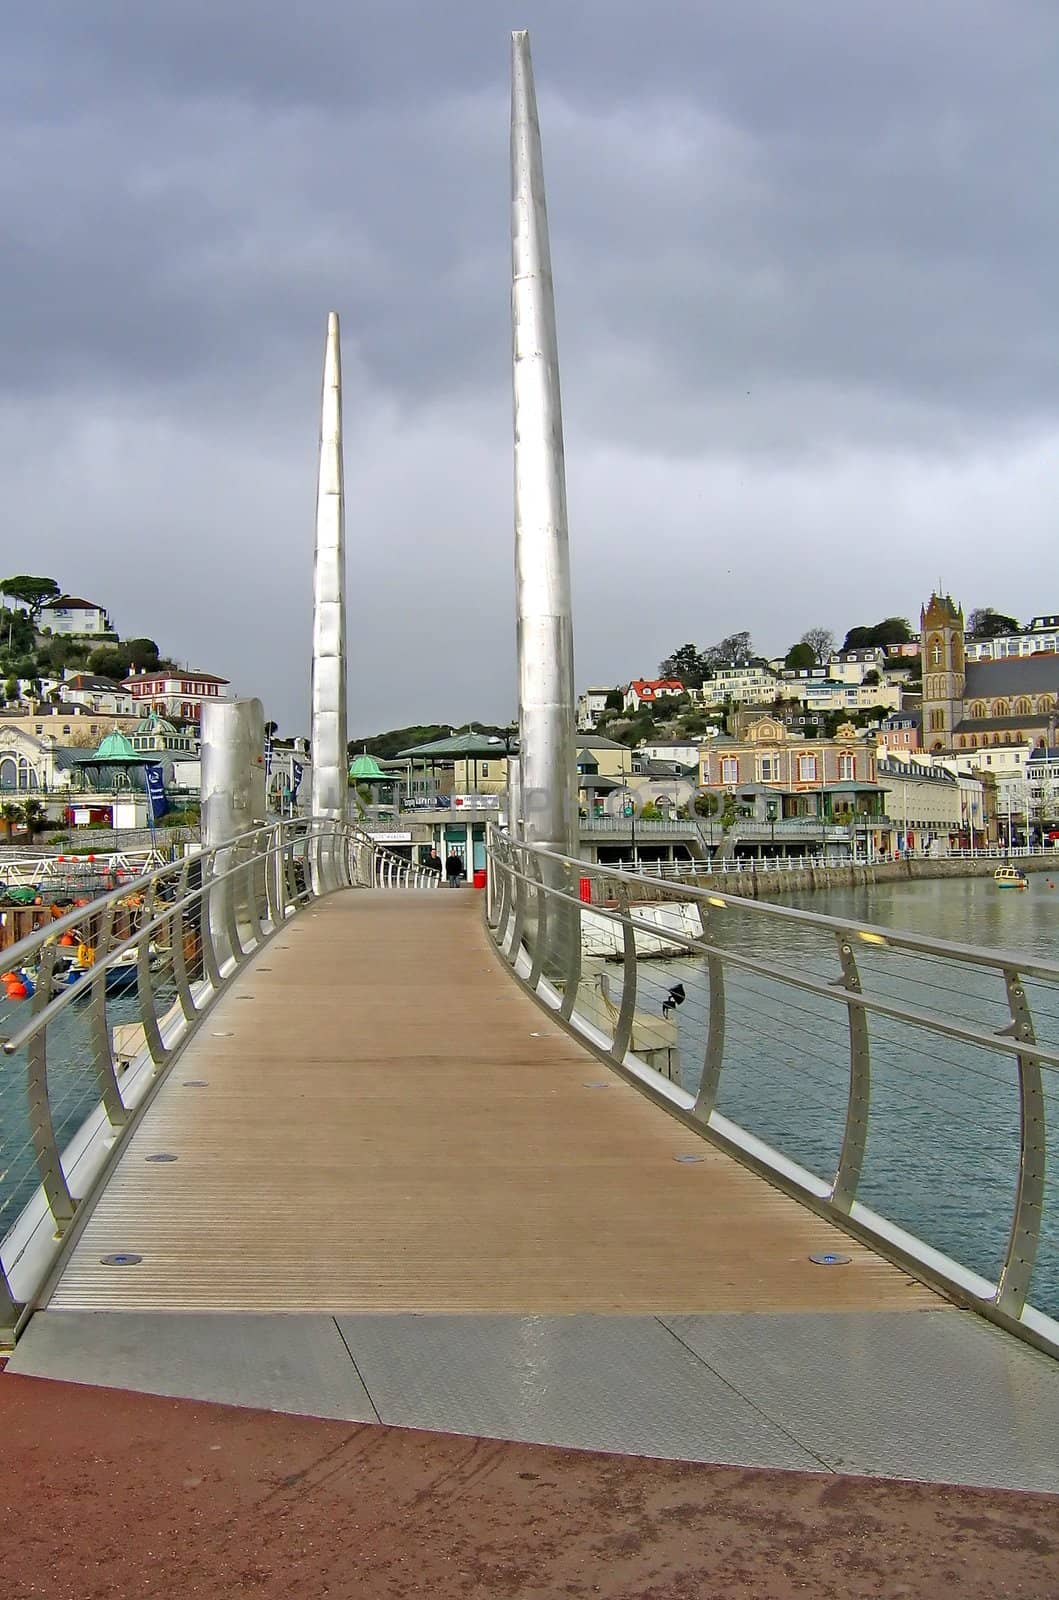 Walkway over pedestrial bridge in Plymouth, England with two shiney steel spires.